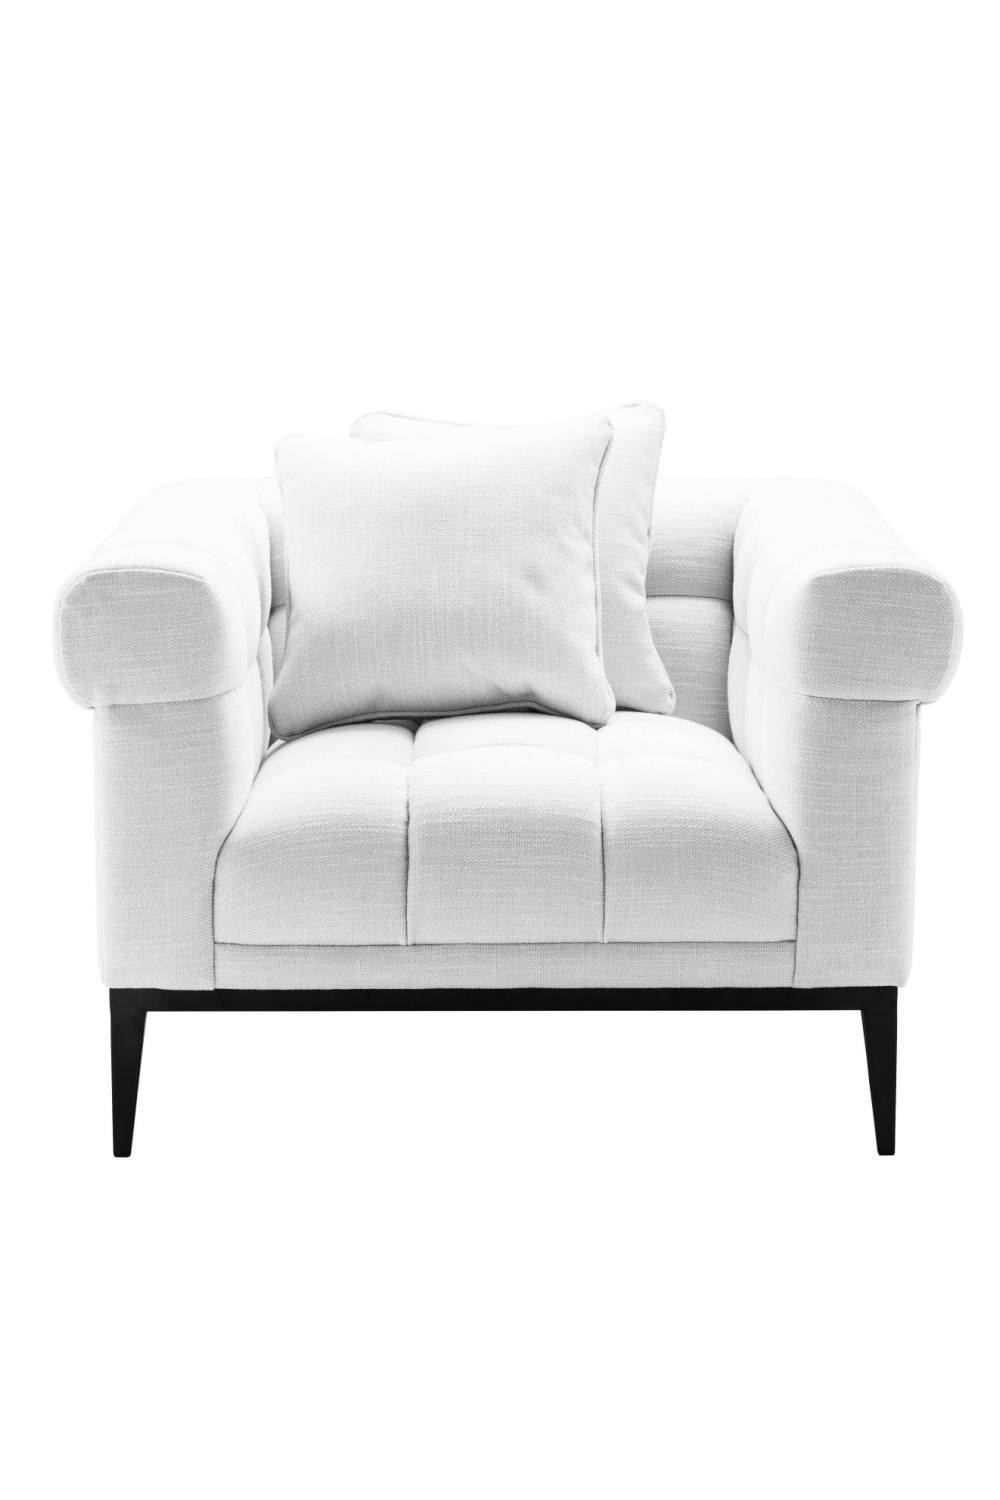 Ebern Designs Aroha Upholstered Accent Chair